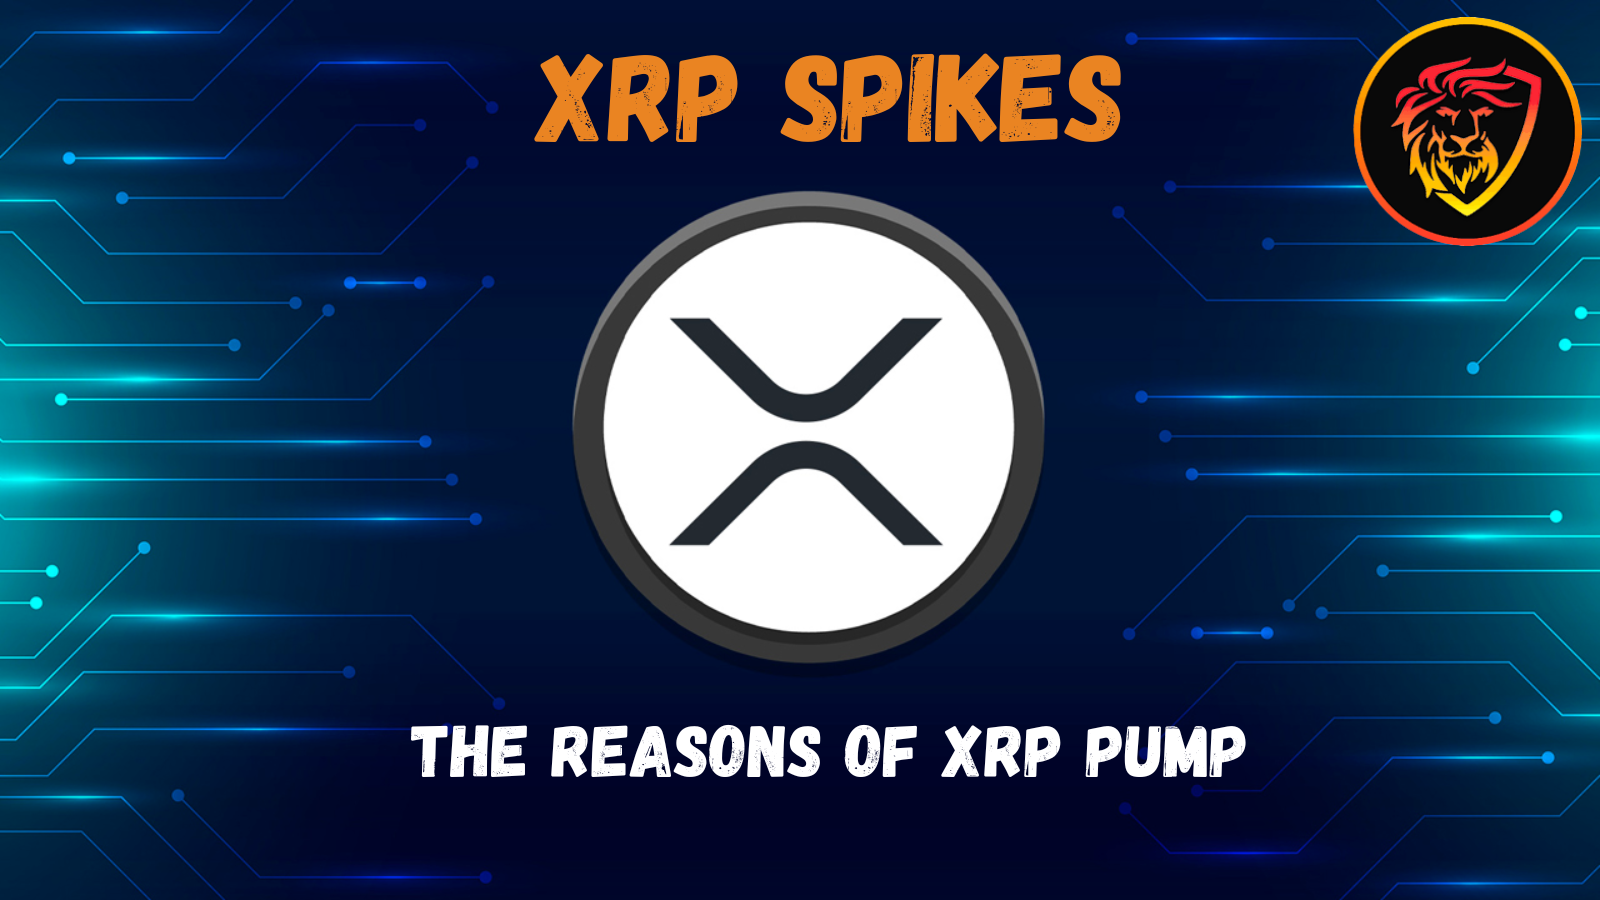 @idiosyncratic1/xrp-spikes-to-4-month-ath-in-crypto-bear-market